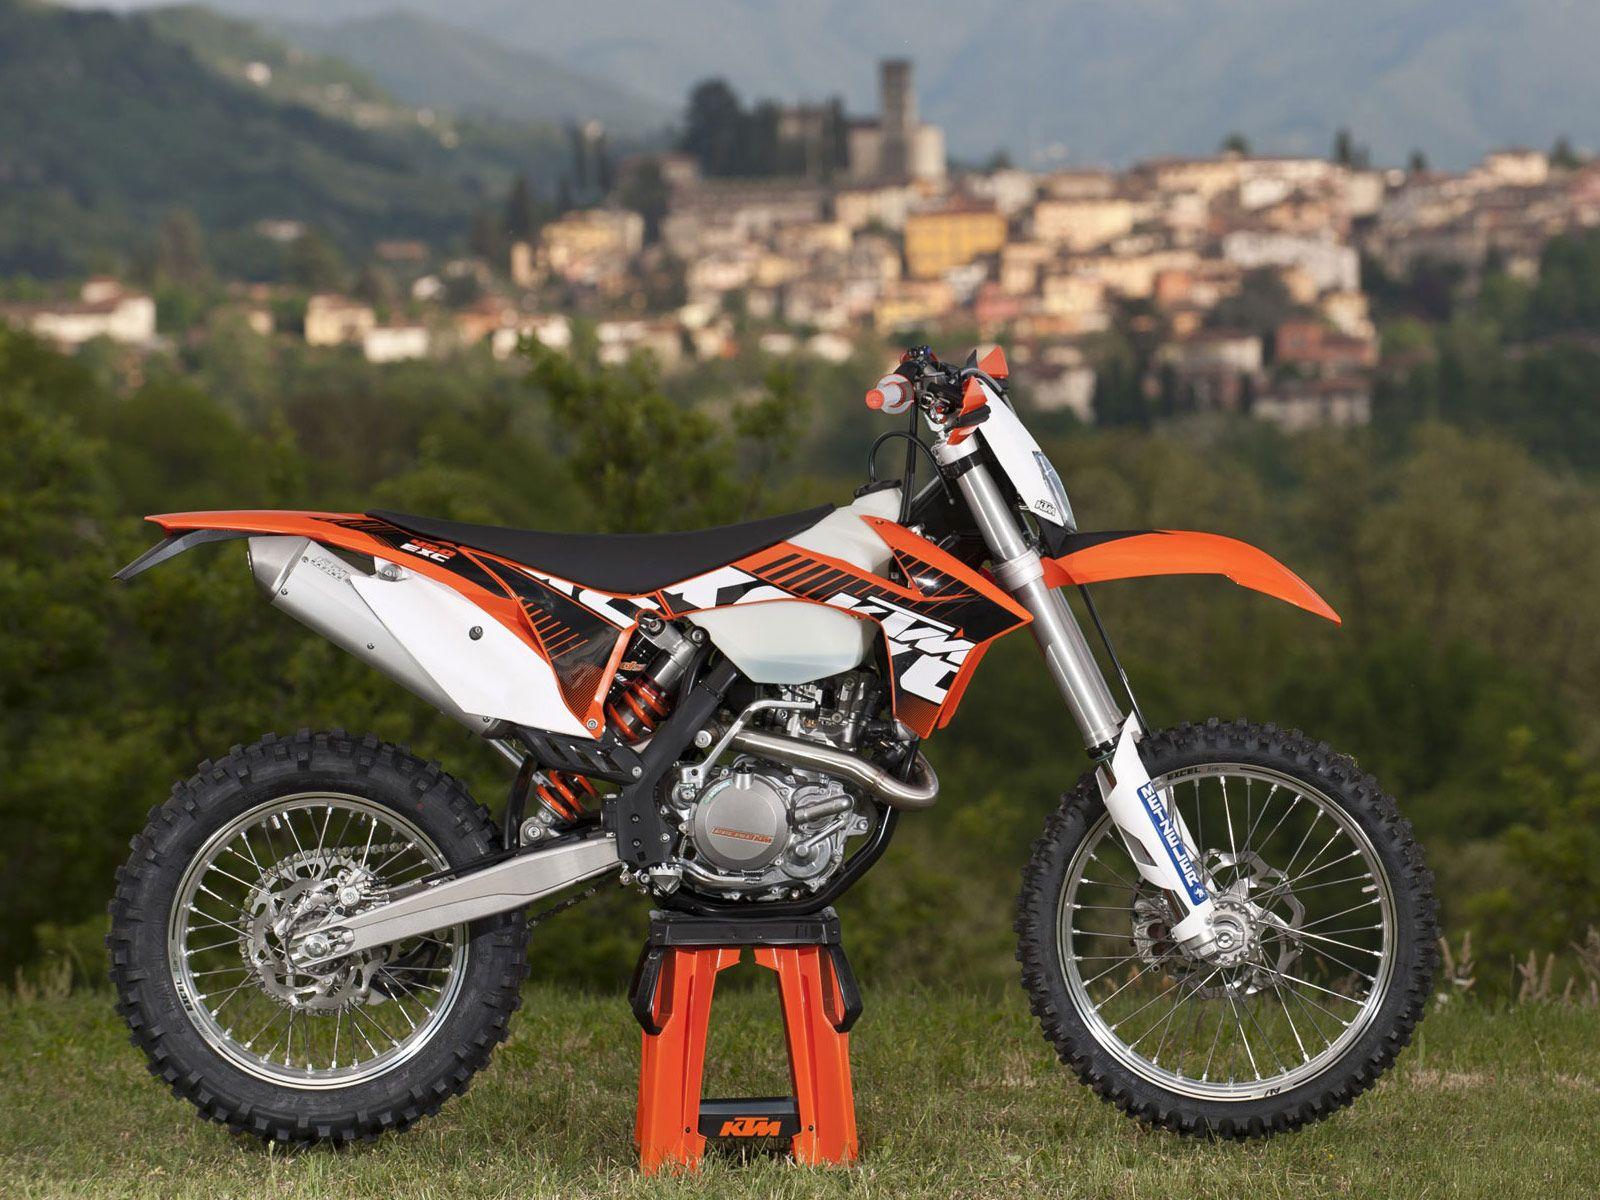 Auto Mobile Cars: 2012 KTM 450 EXC motorcycle review, wallpaper